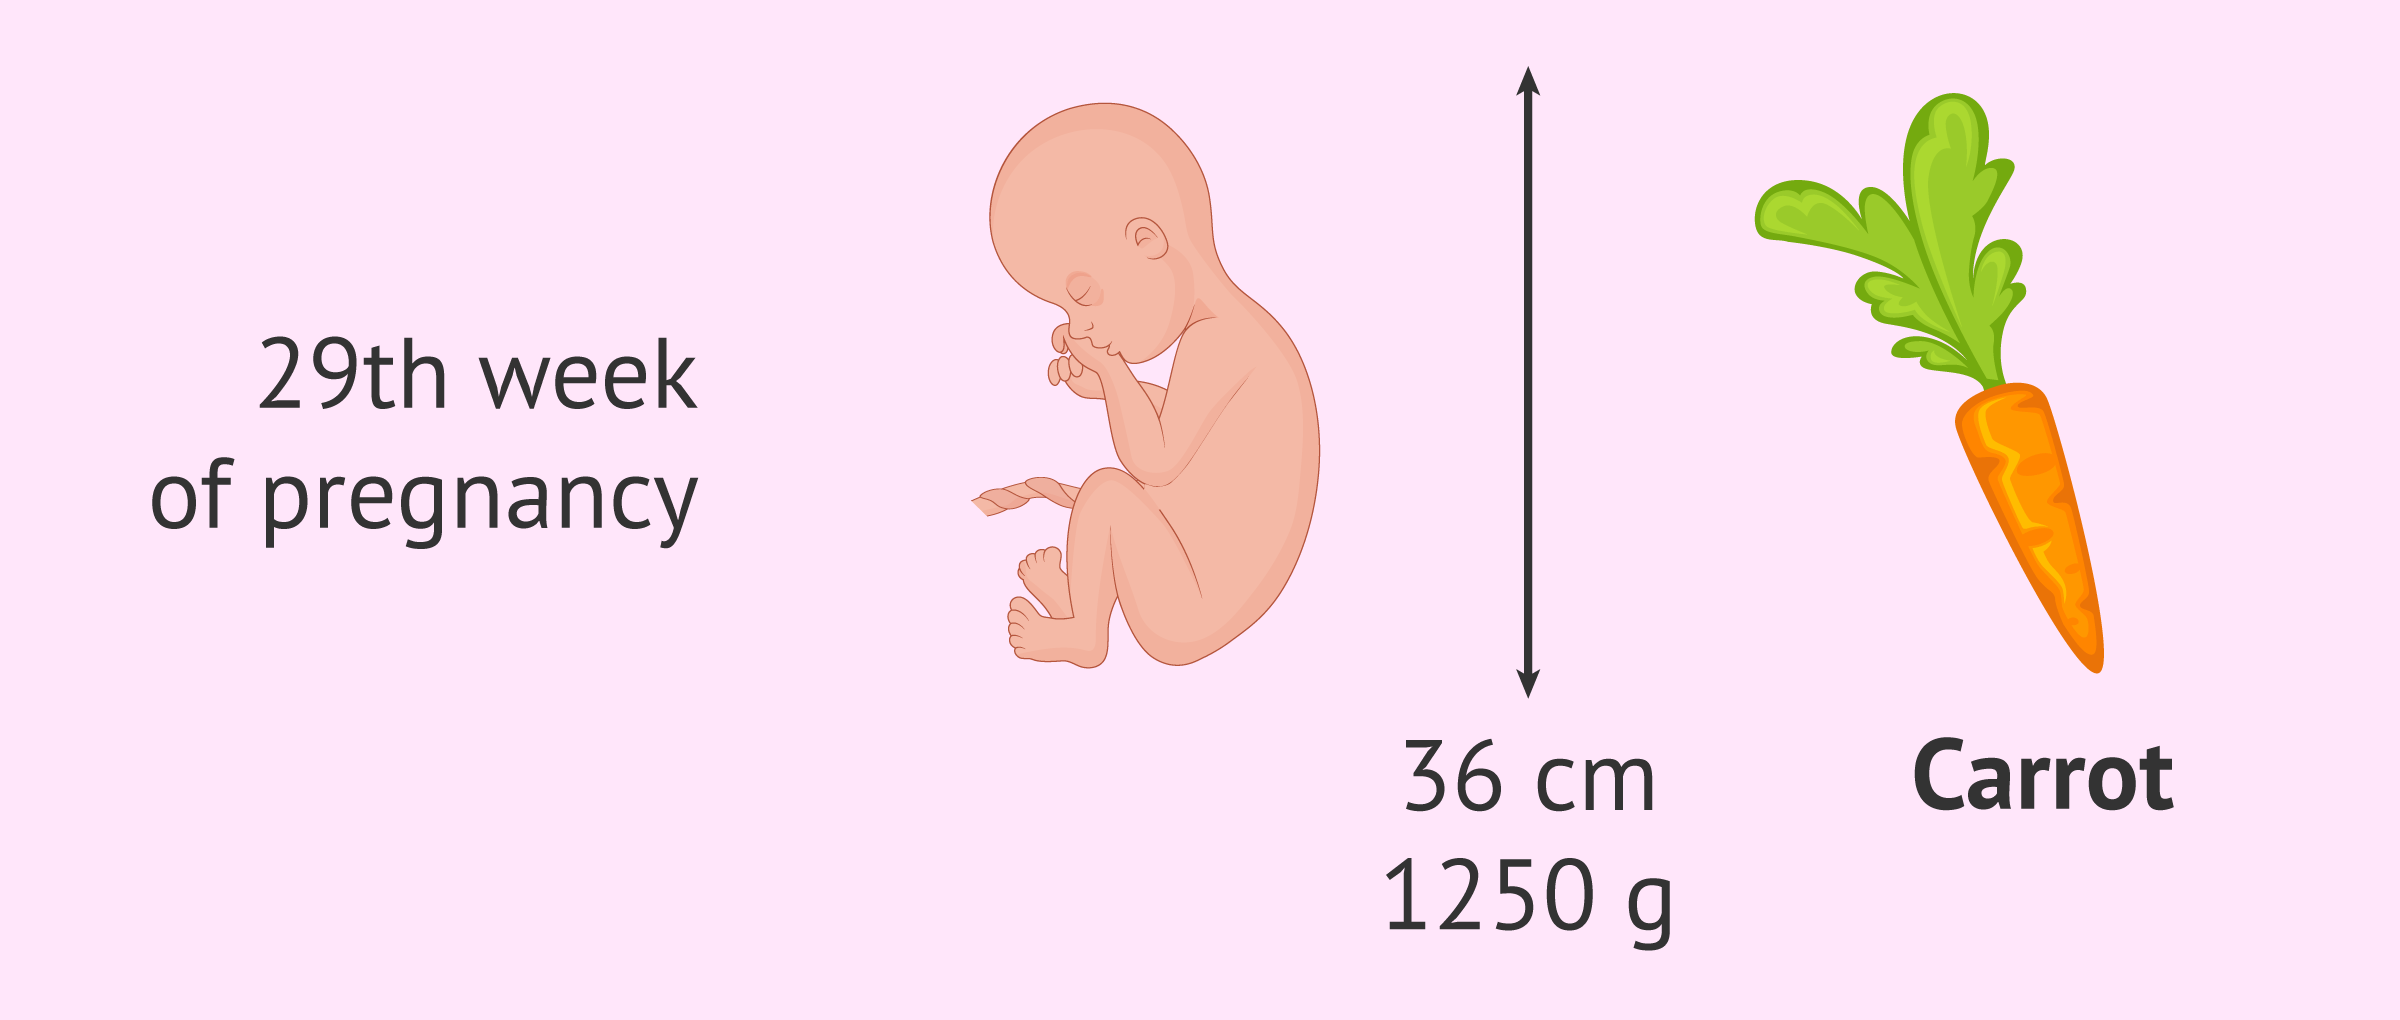 How tall is the foetus at 29 weeks?